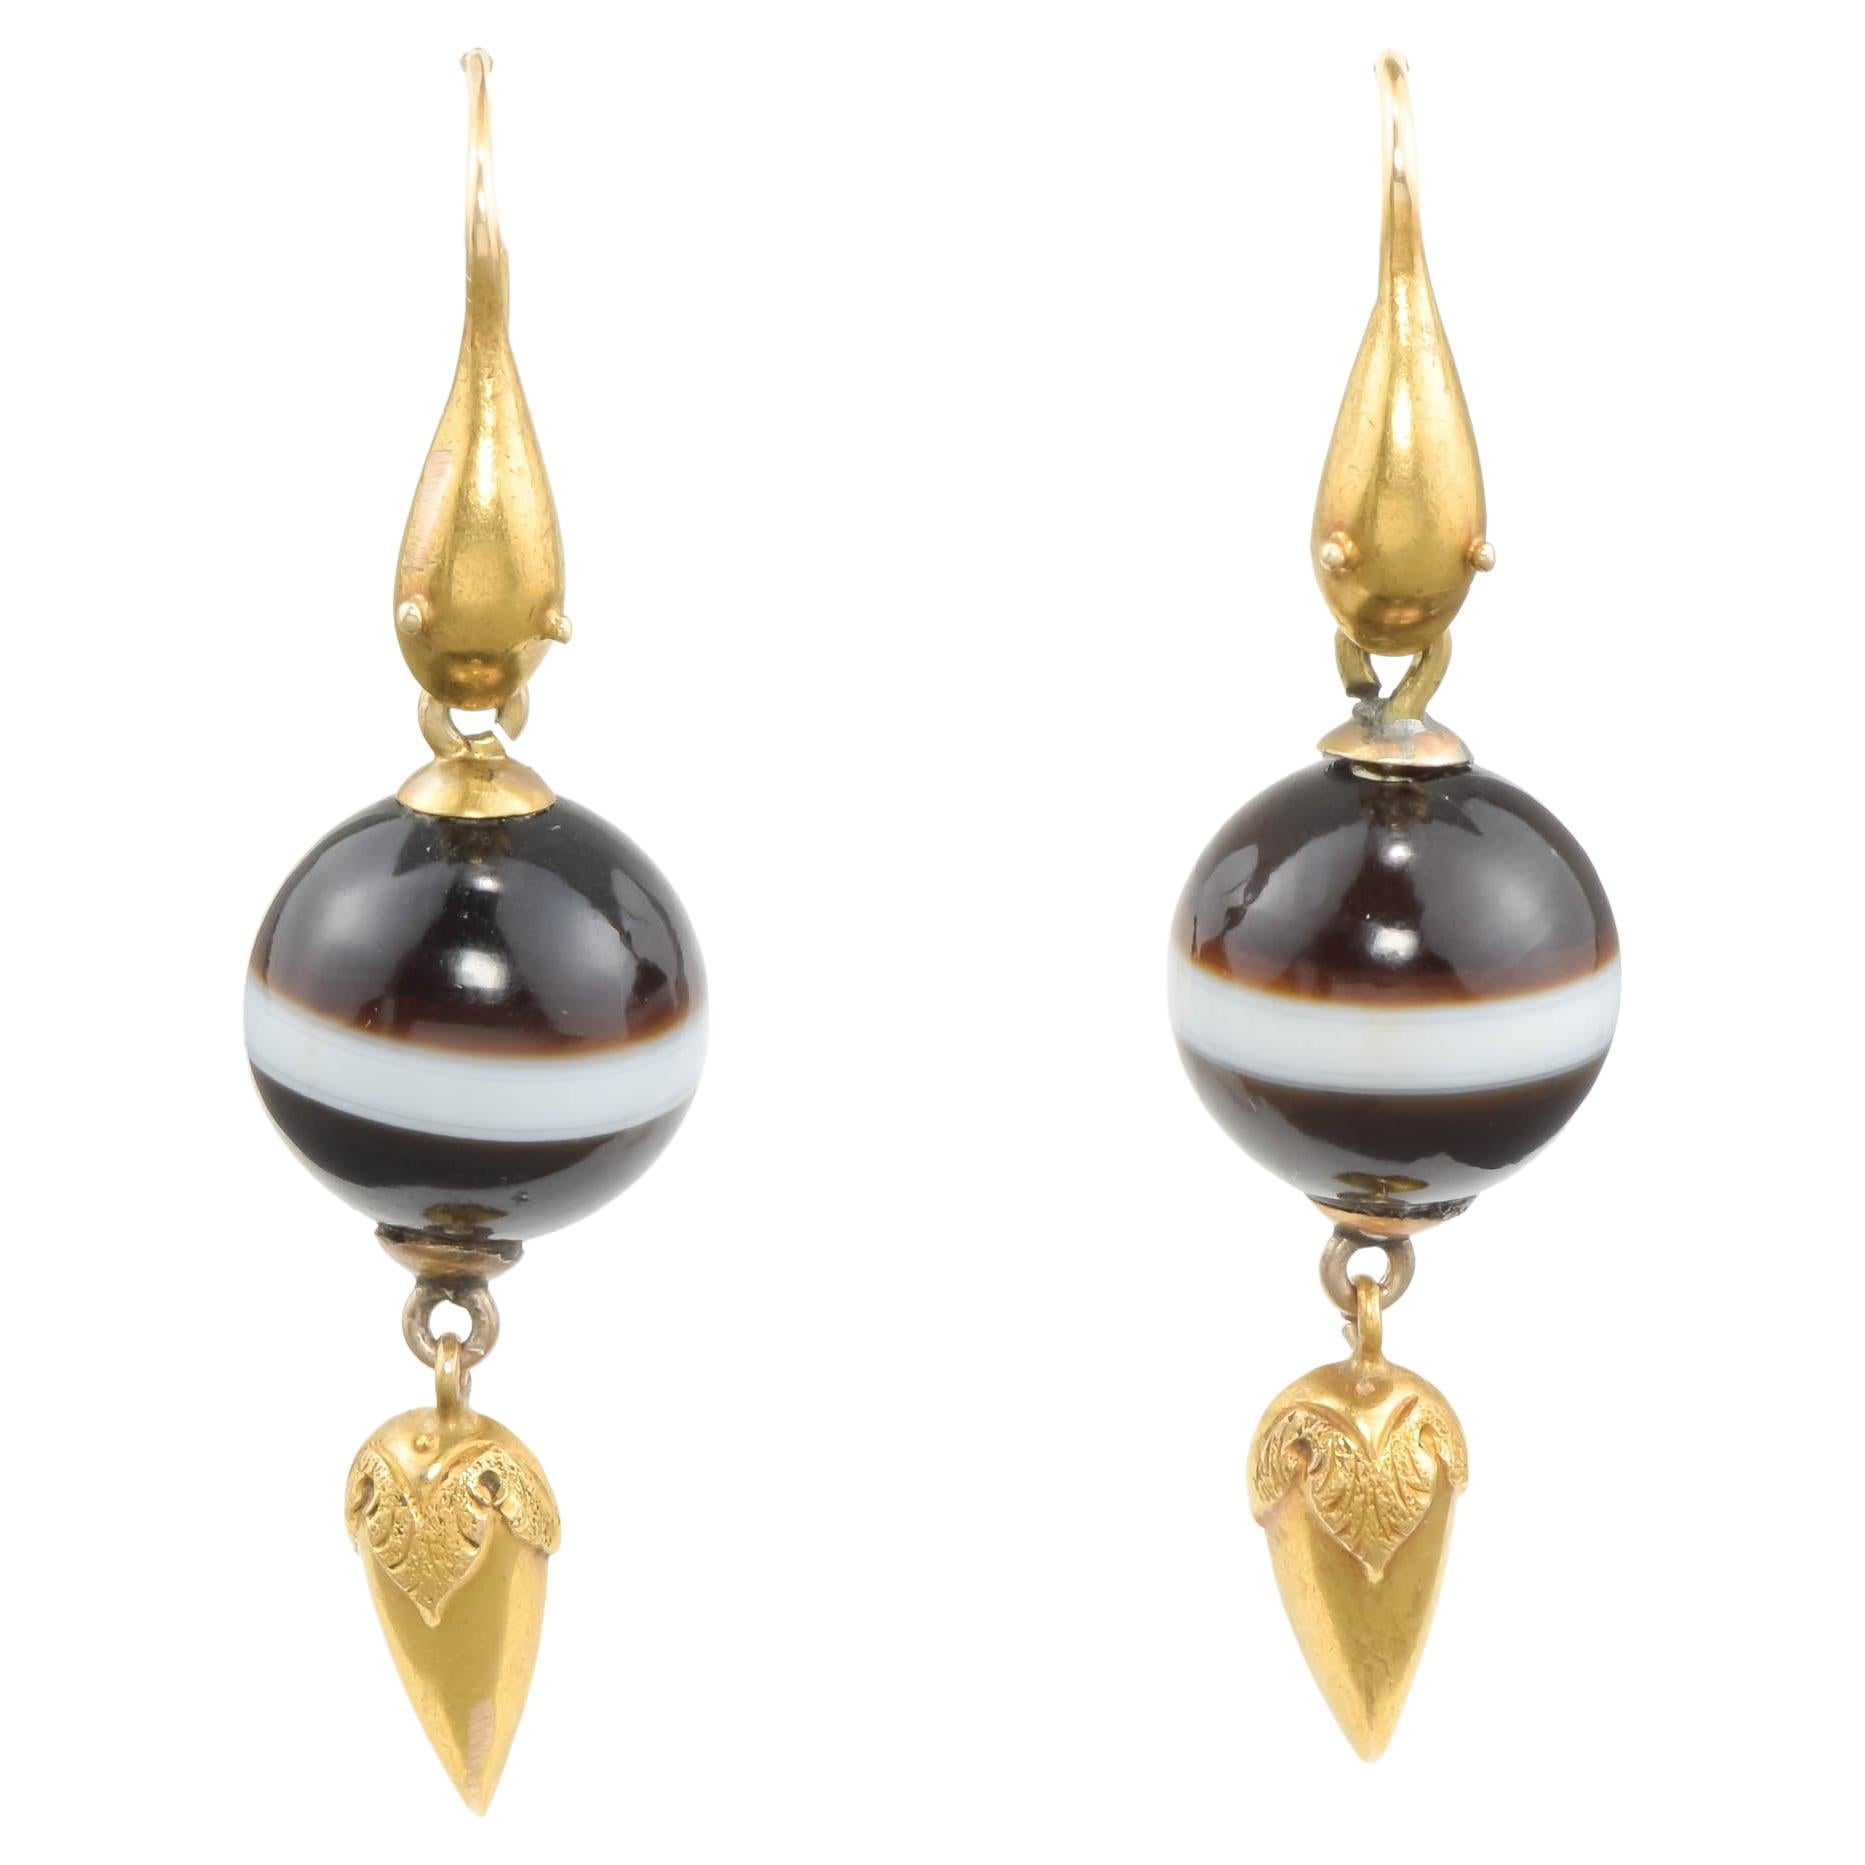 Victorian Gold Snake Earrings with Banded Agate Drops